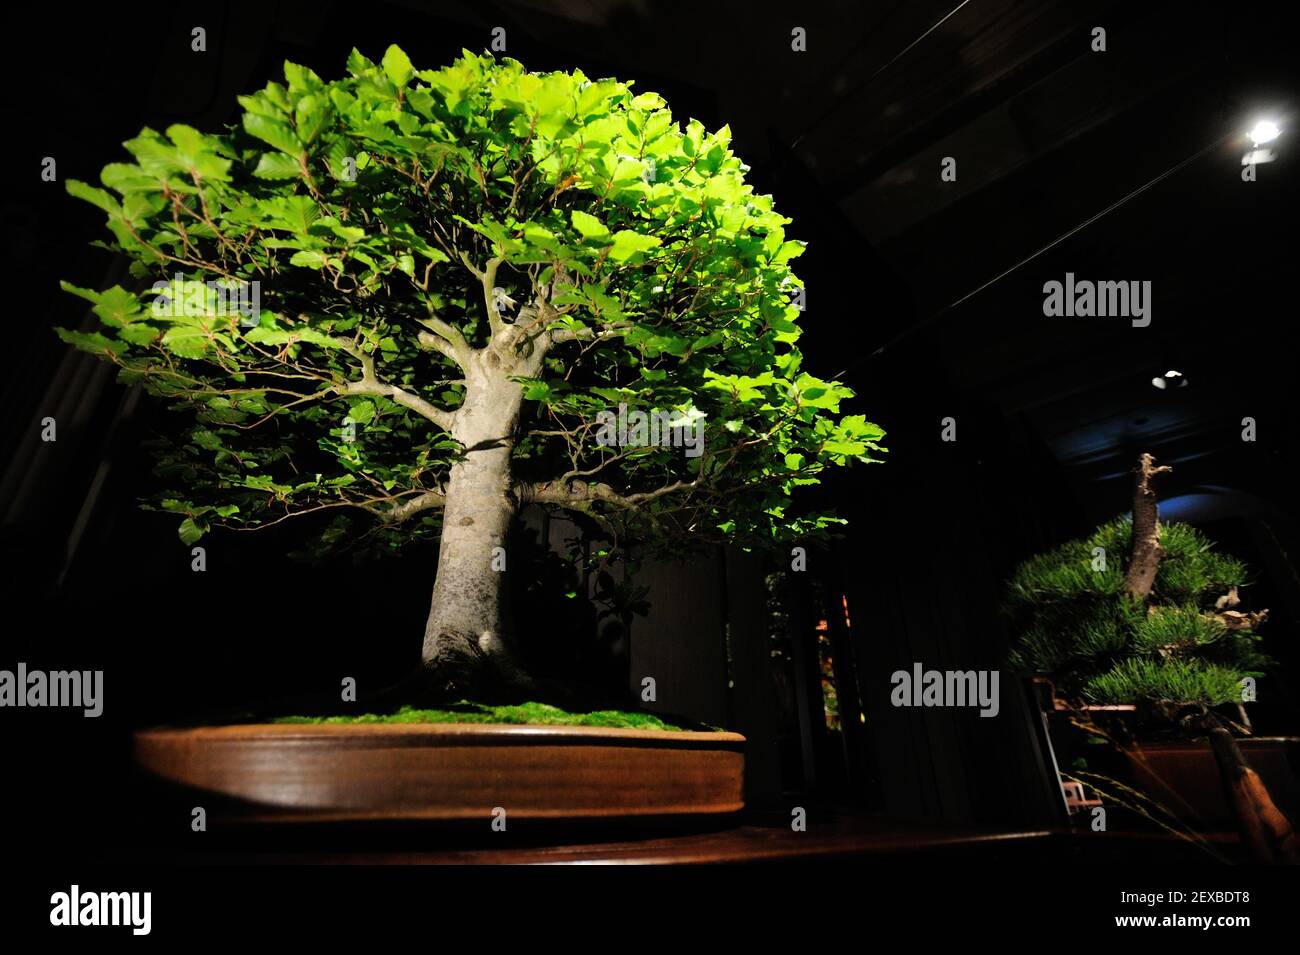 The Artisans Cup, held at the Portland Art Museum in Portland, Ore., from September 25-27, 2015, celebrates the growing art of American Bonsai and all those devoted to excellence in the craft. A 40-year-old European Beech, that has been in training for 20 years, from Scott Elser is pictured at the exhibit on September 26, 2015. (Photo by Alex Milan Tracy) *** Please Use Credit from Credit Field *** Stock Photo